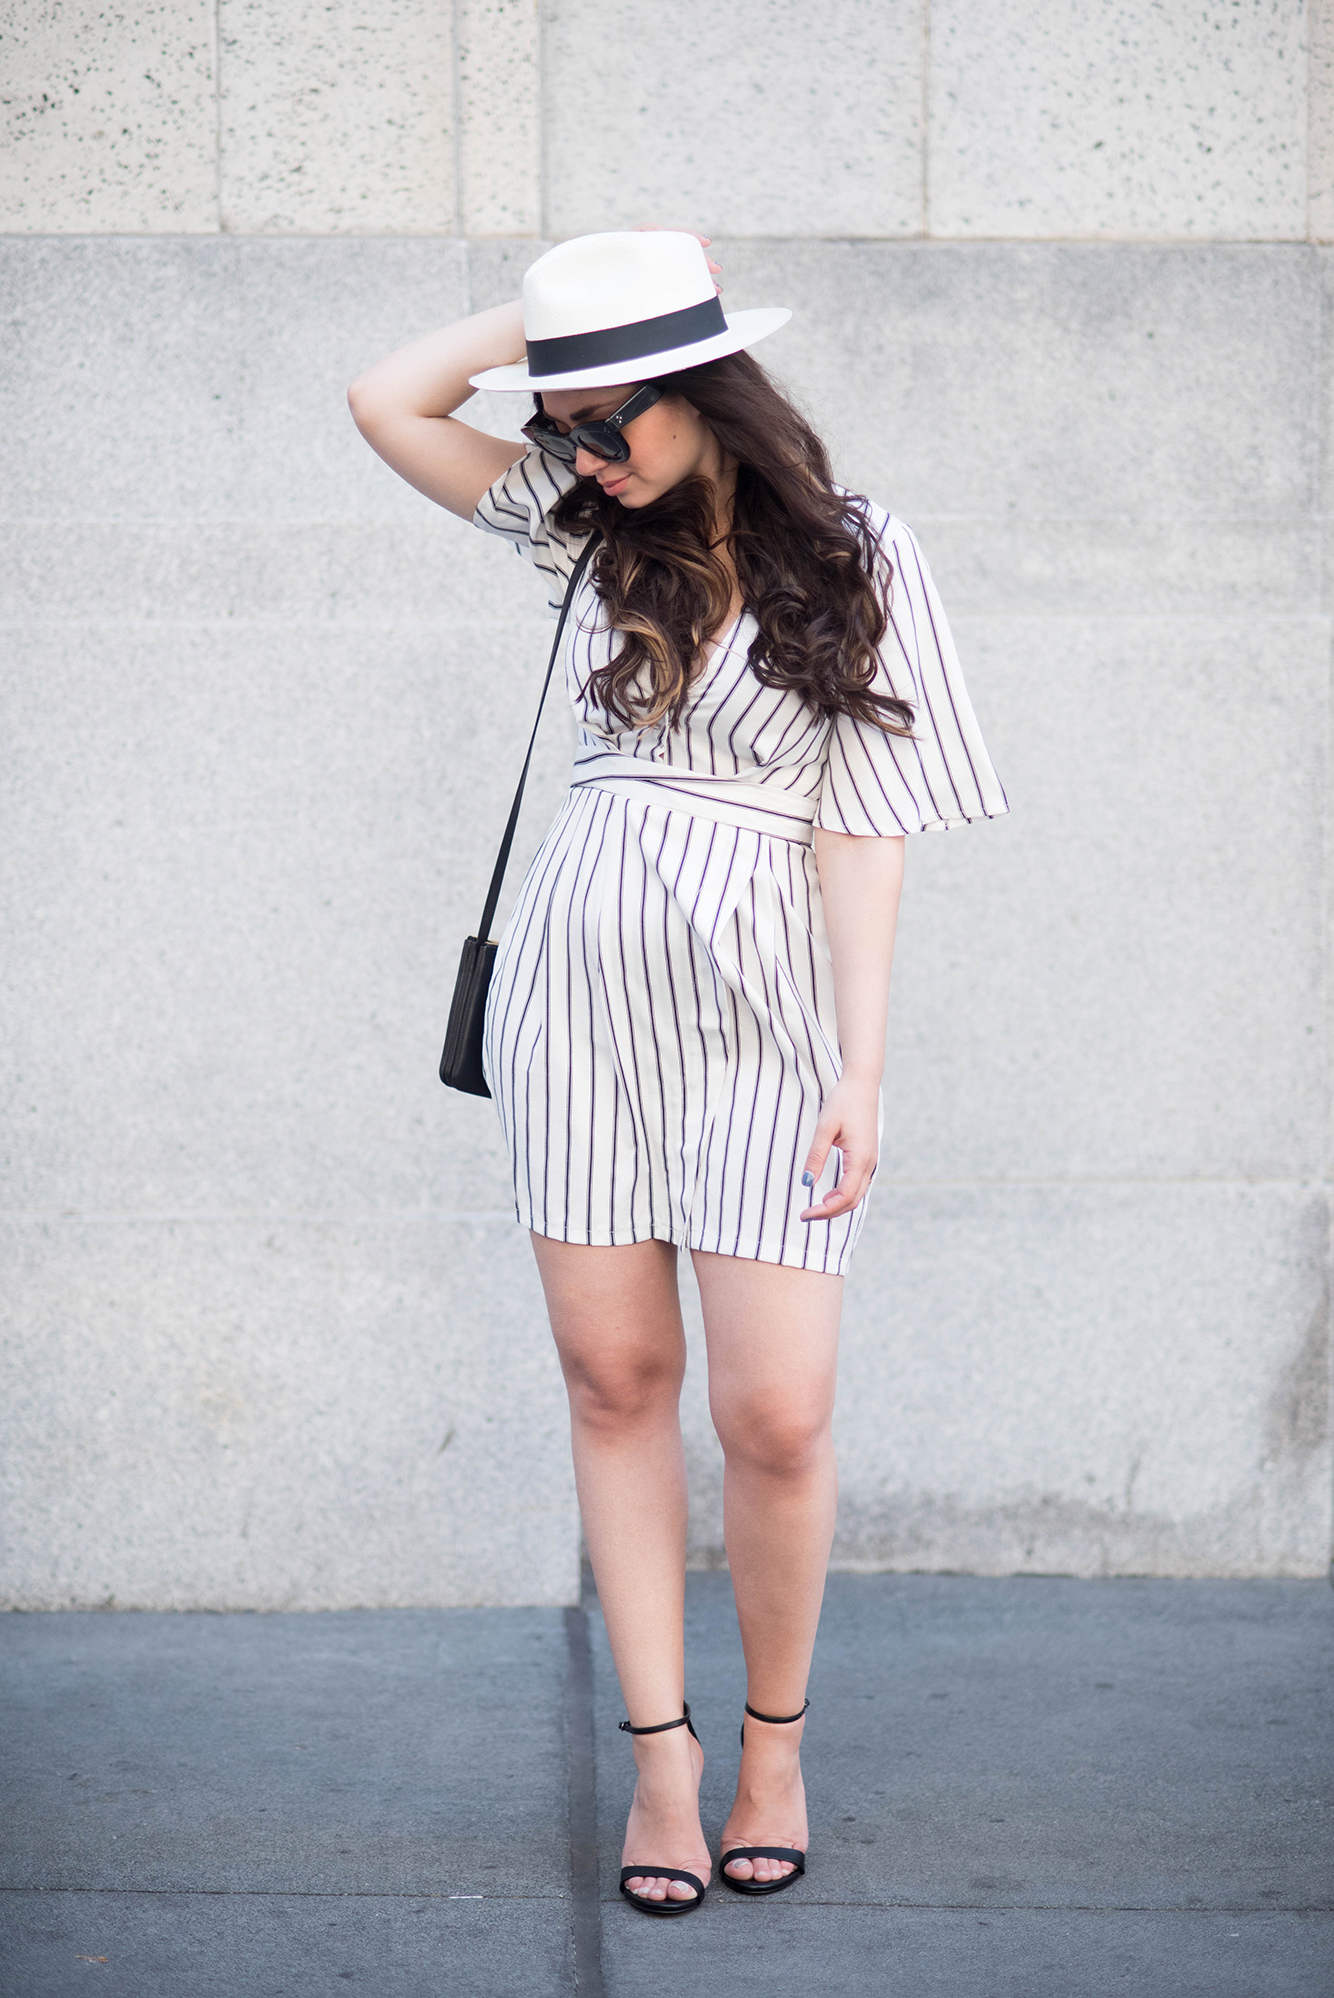 coco-and-vera-best-vancouver-fashion-blog-best-canadian-fashion-blog-top-blogger-street-style-cuyana-panama-hat-shop-maccs-dress-steve-madden-stecy-sandals-celine-trio-bag